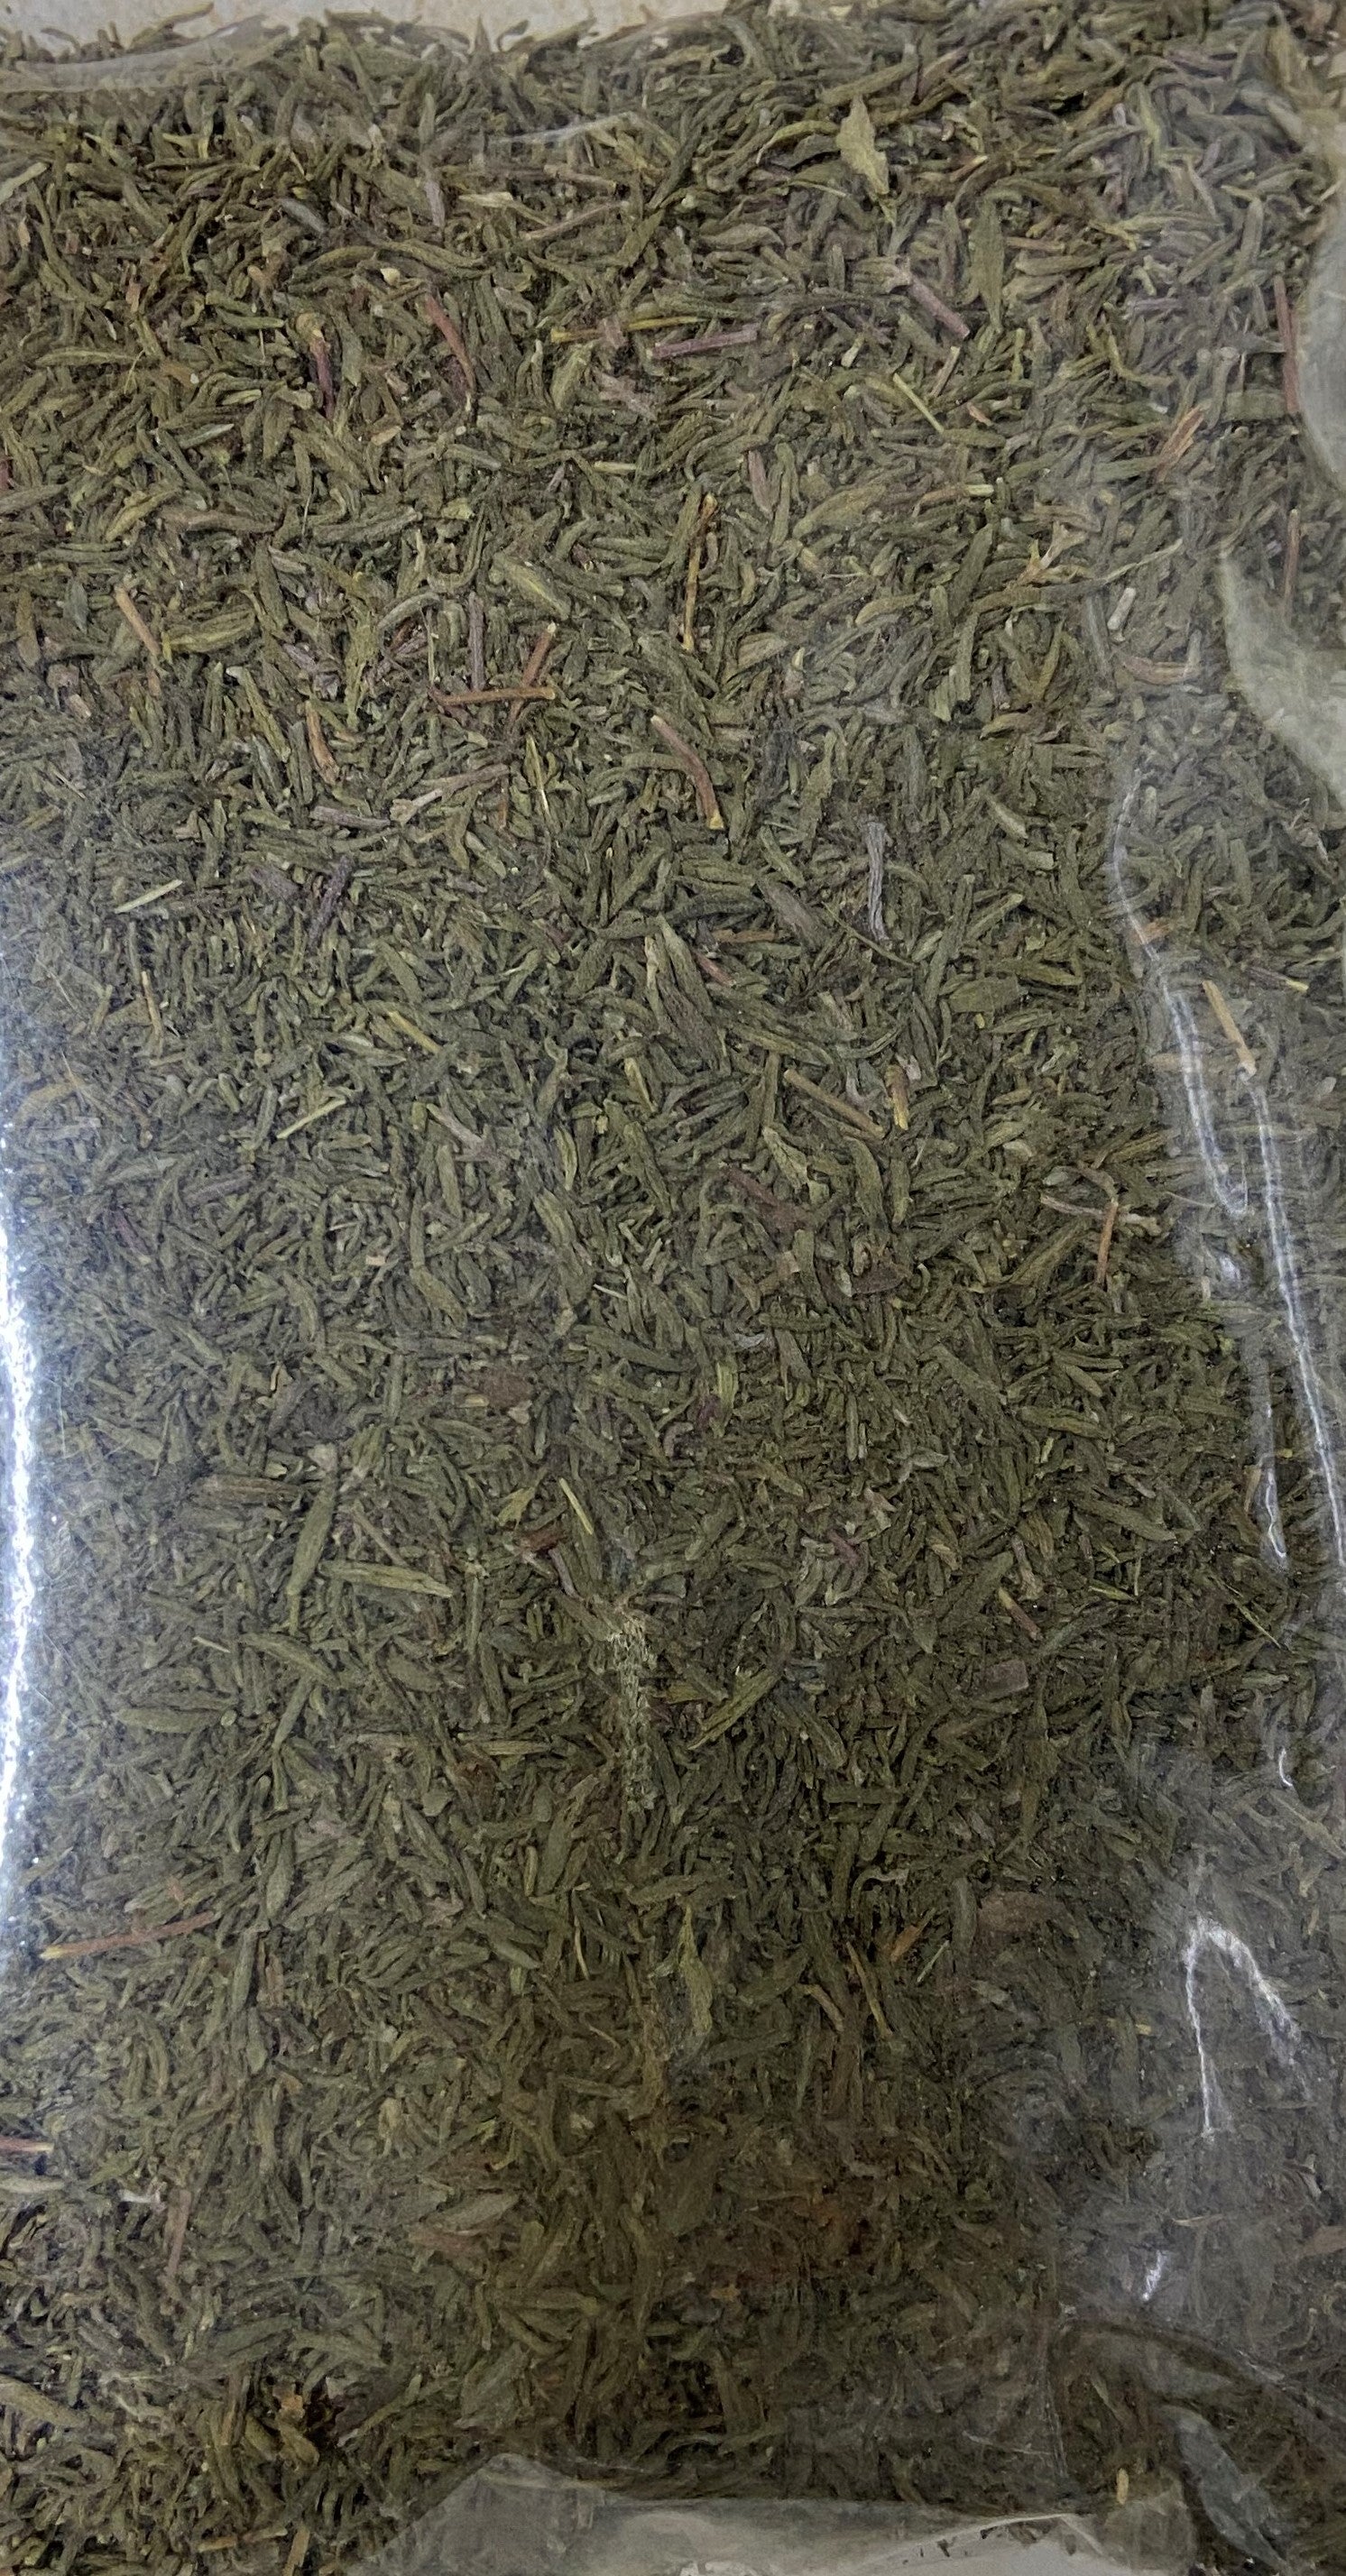 Thyme Whole 56 grams.